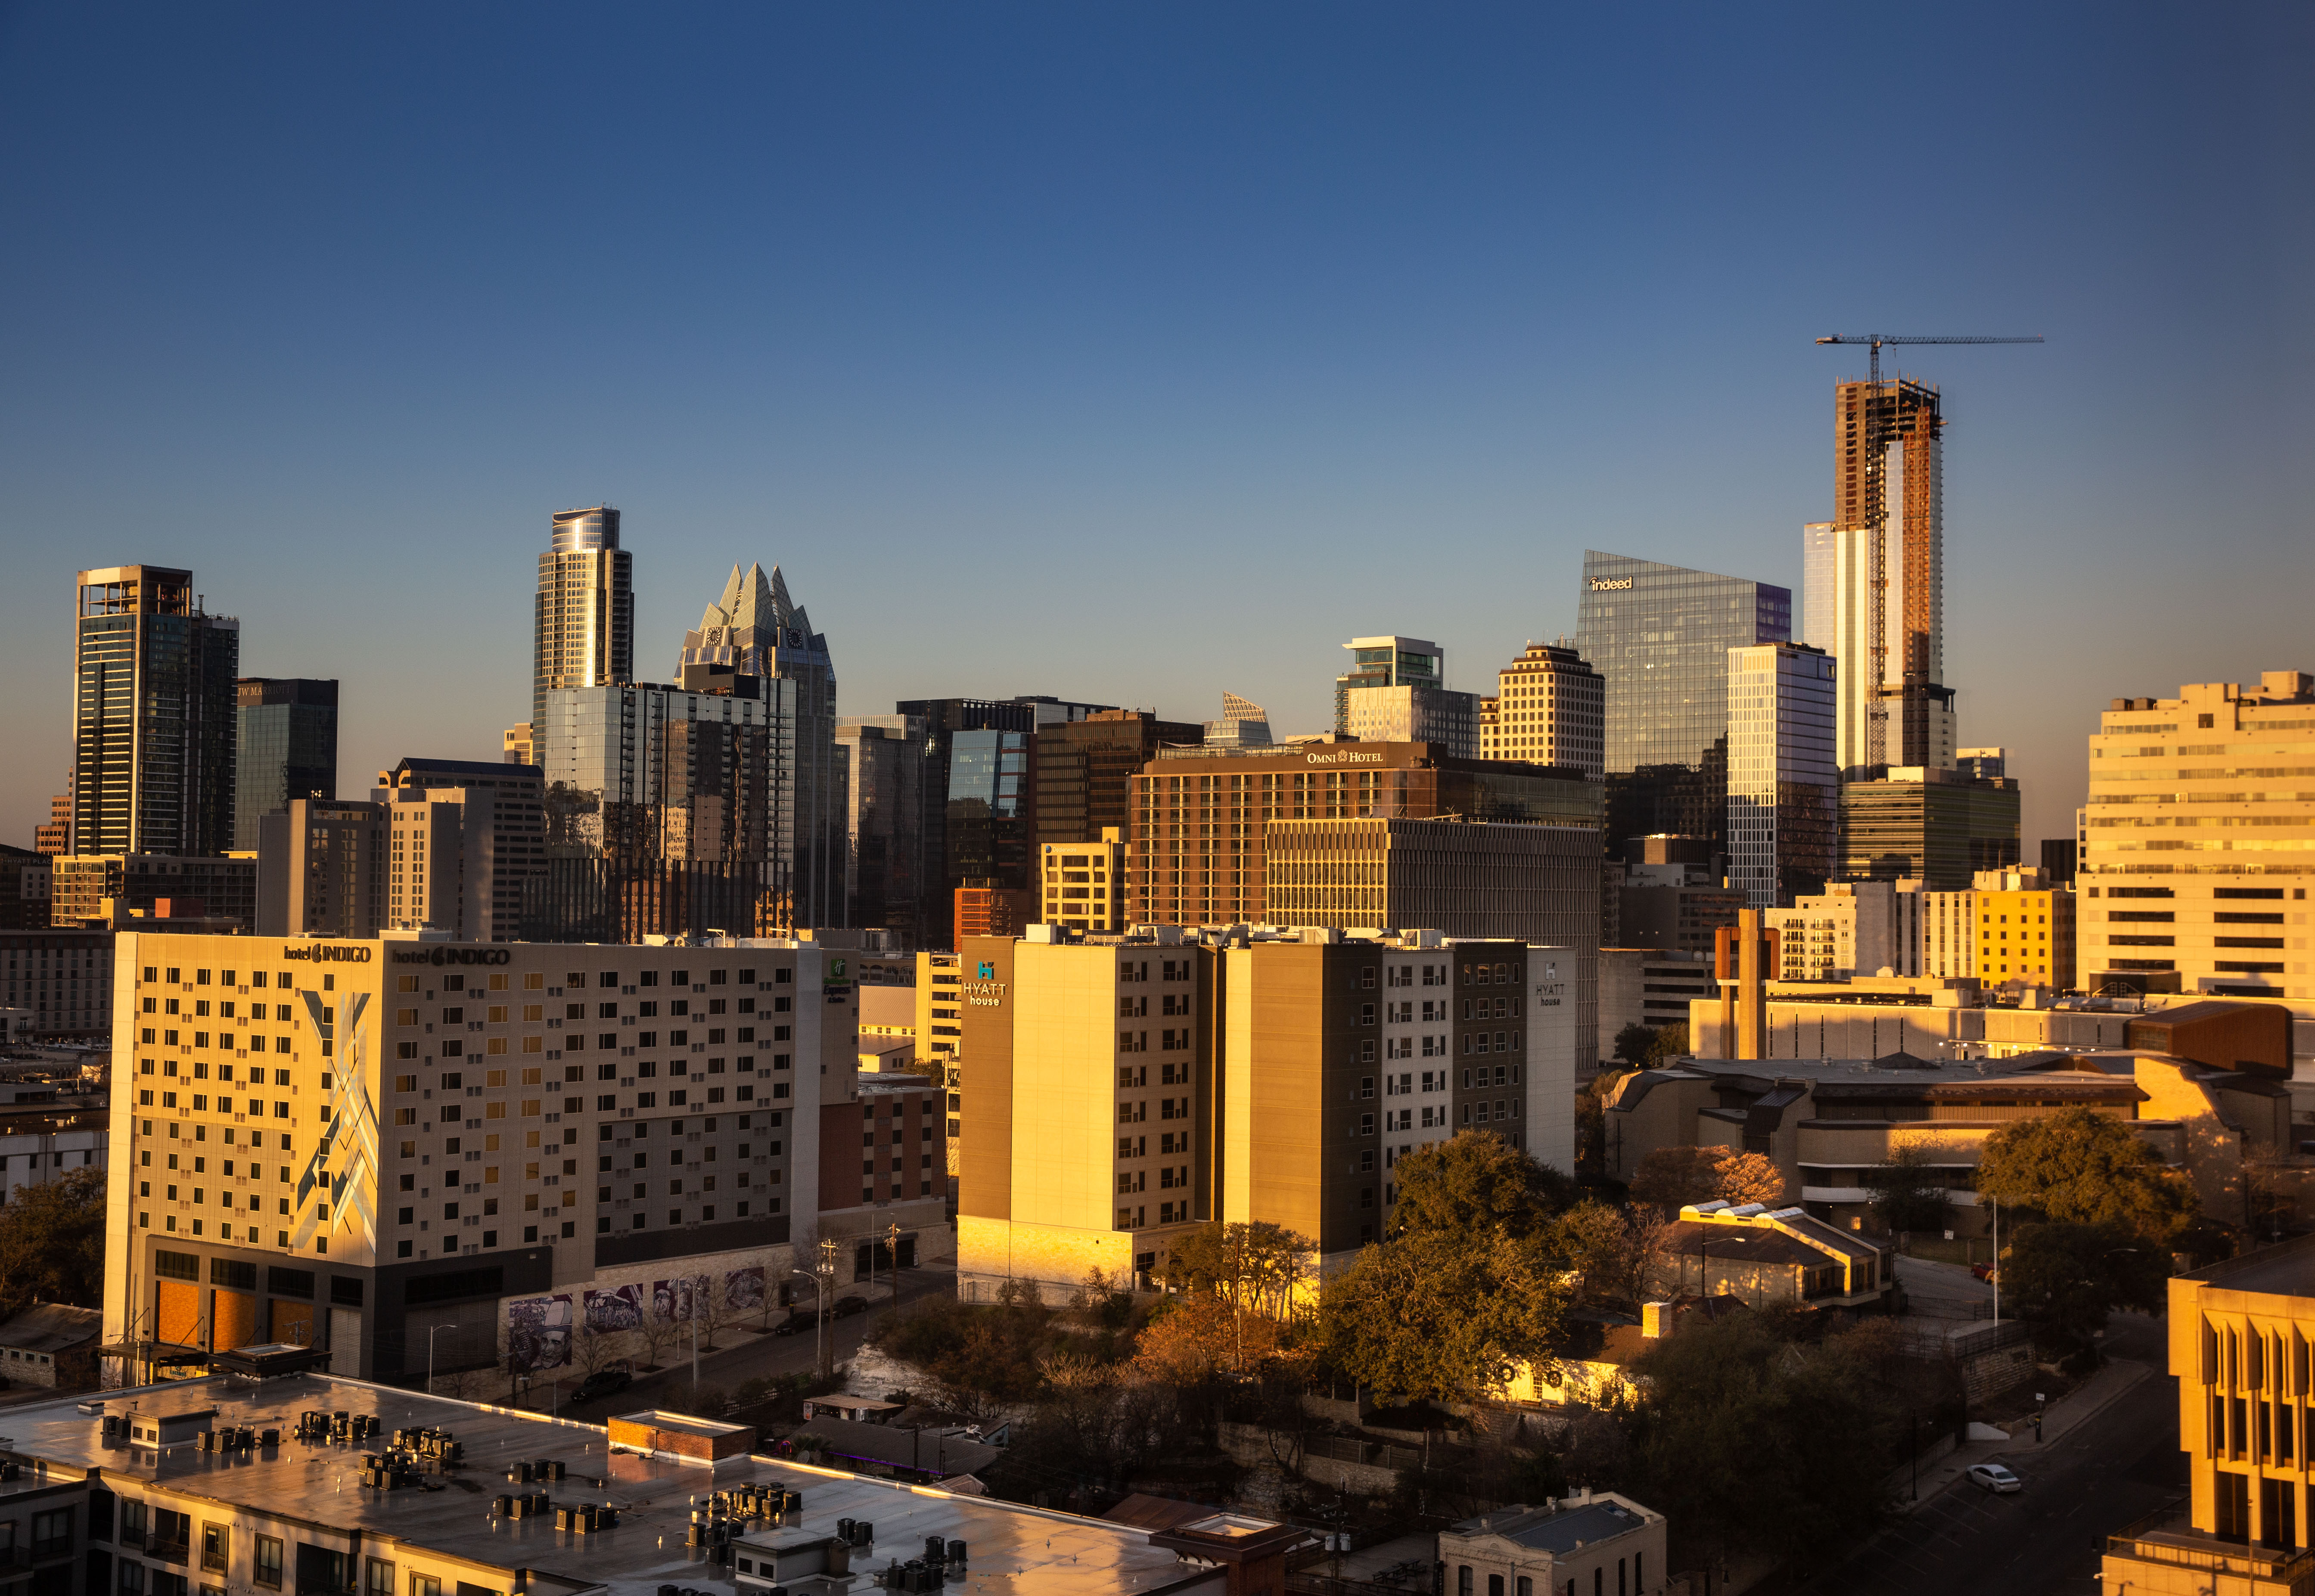 The ever-changing downtown skyline is viewed after sunrise on January 17, 2023, in Austin, Texas. Austin, the State Capitol of Texas, is the state’s second largest city and continues to experience a bustling building boom based on increased government, a return of tourism following Covid-19, onshoring of China-based businesses, and an influx of Silicon Valley tech companies expanding their operations.